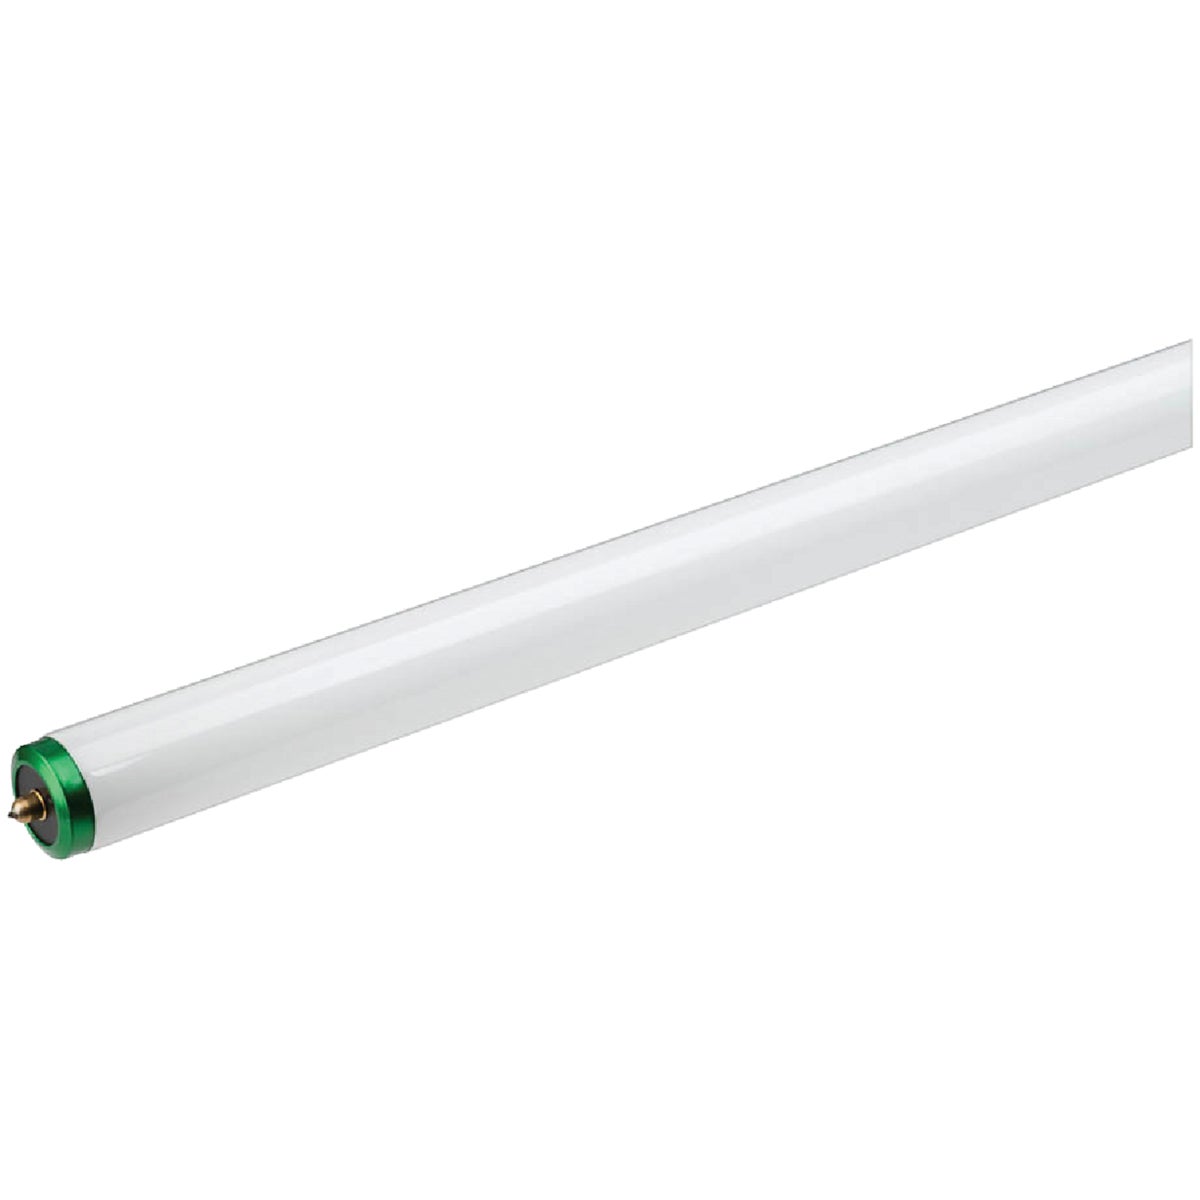 Philips ALTO 60W 96 In. Daylight Deluxe T12 Single Pin Fluorescent Tube Light Bulb (2-Pack)